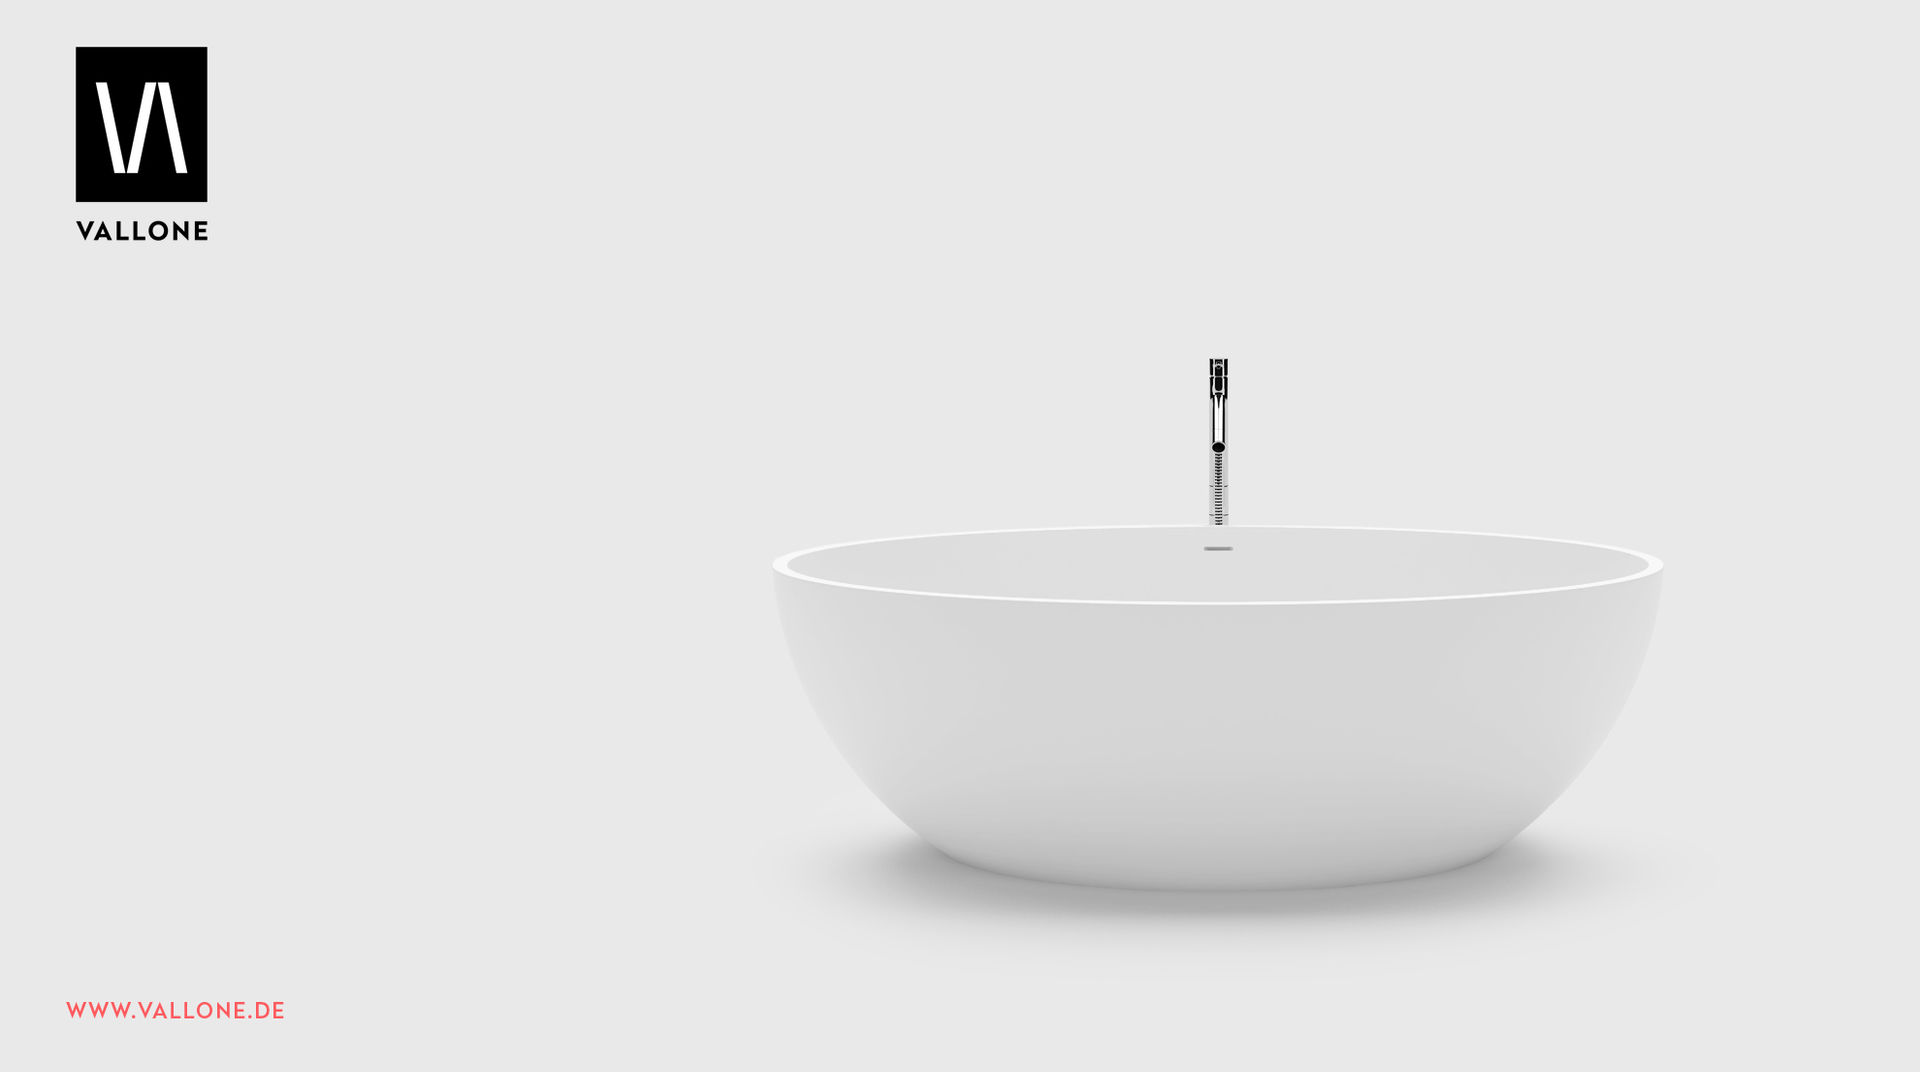 Exposed, Vallone GmbH Vallone GmbH Modern style bathrooms Bathtubs & showers